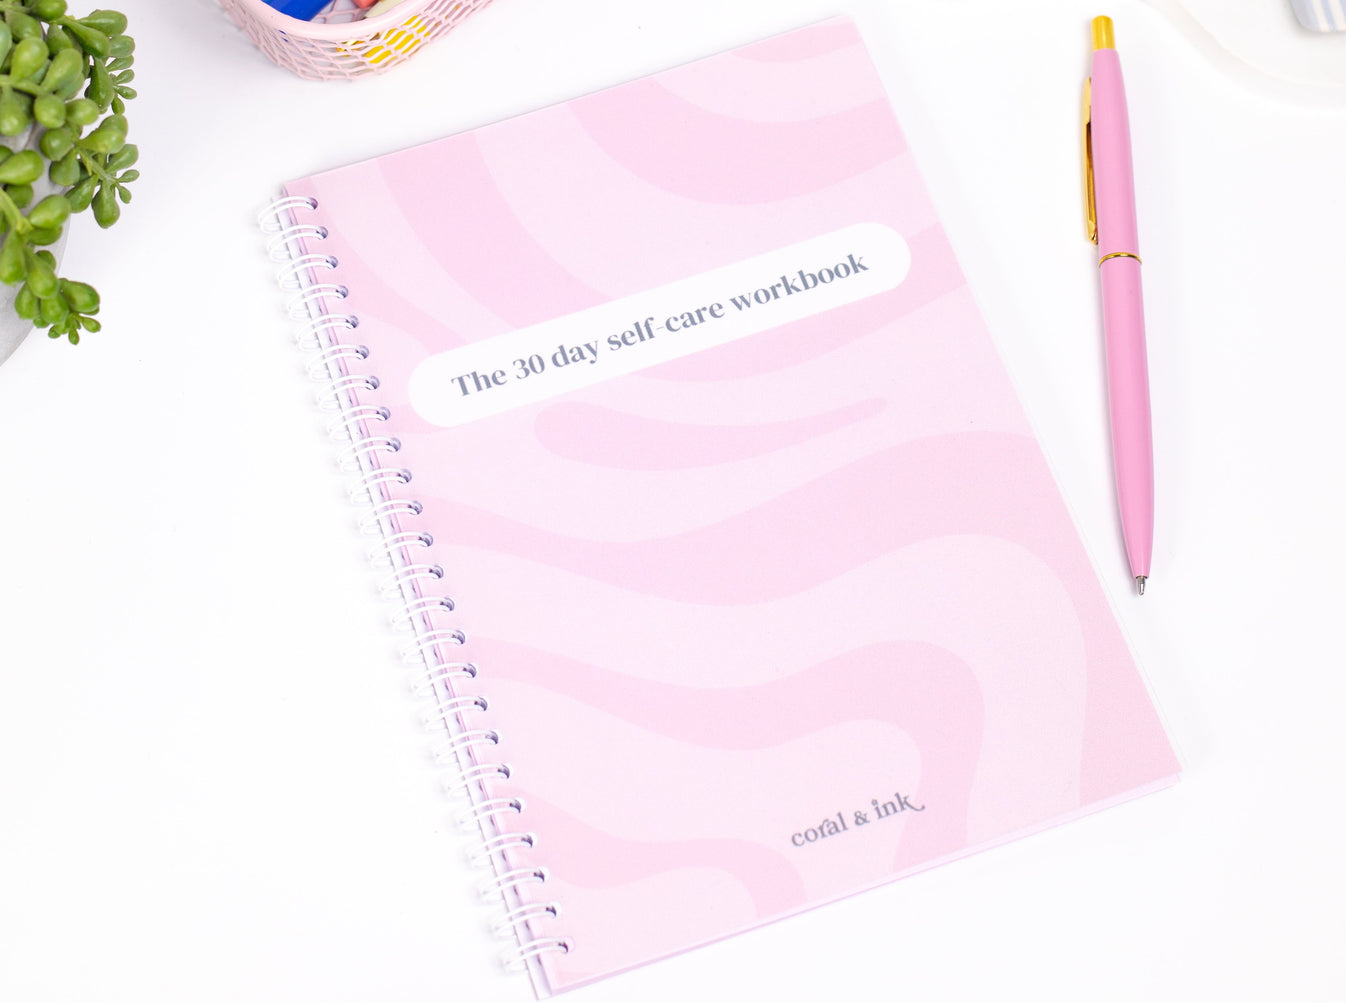 30 Day Self-Care Workbook Planner | Coral & Ink